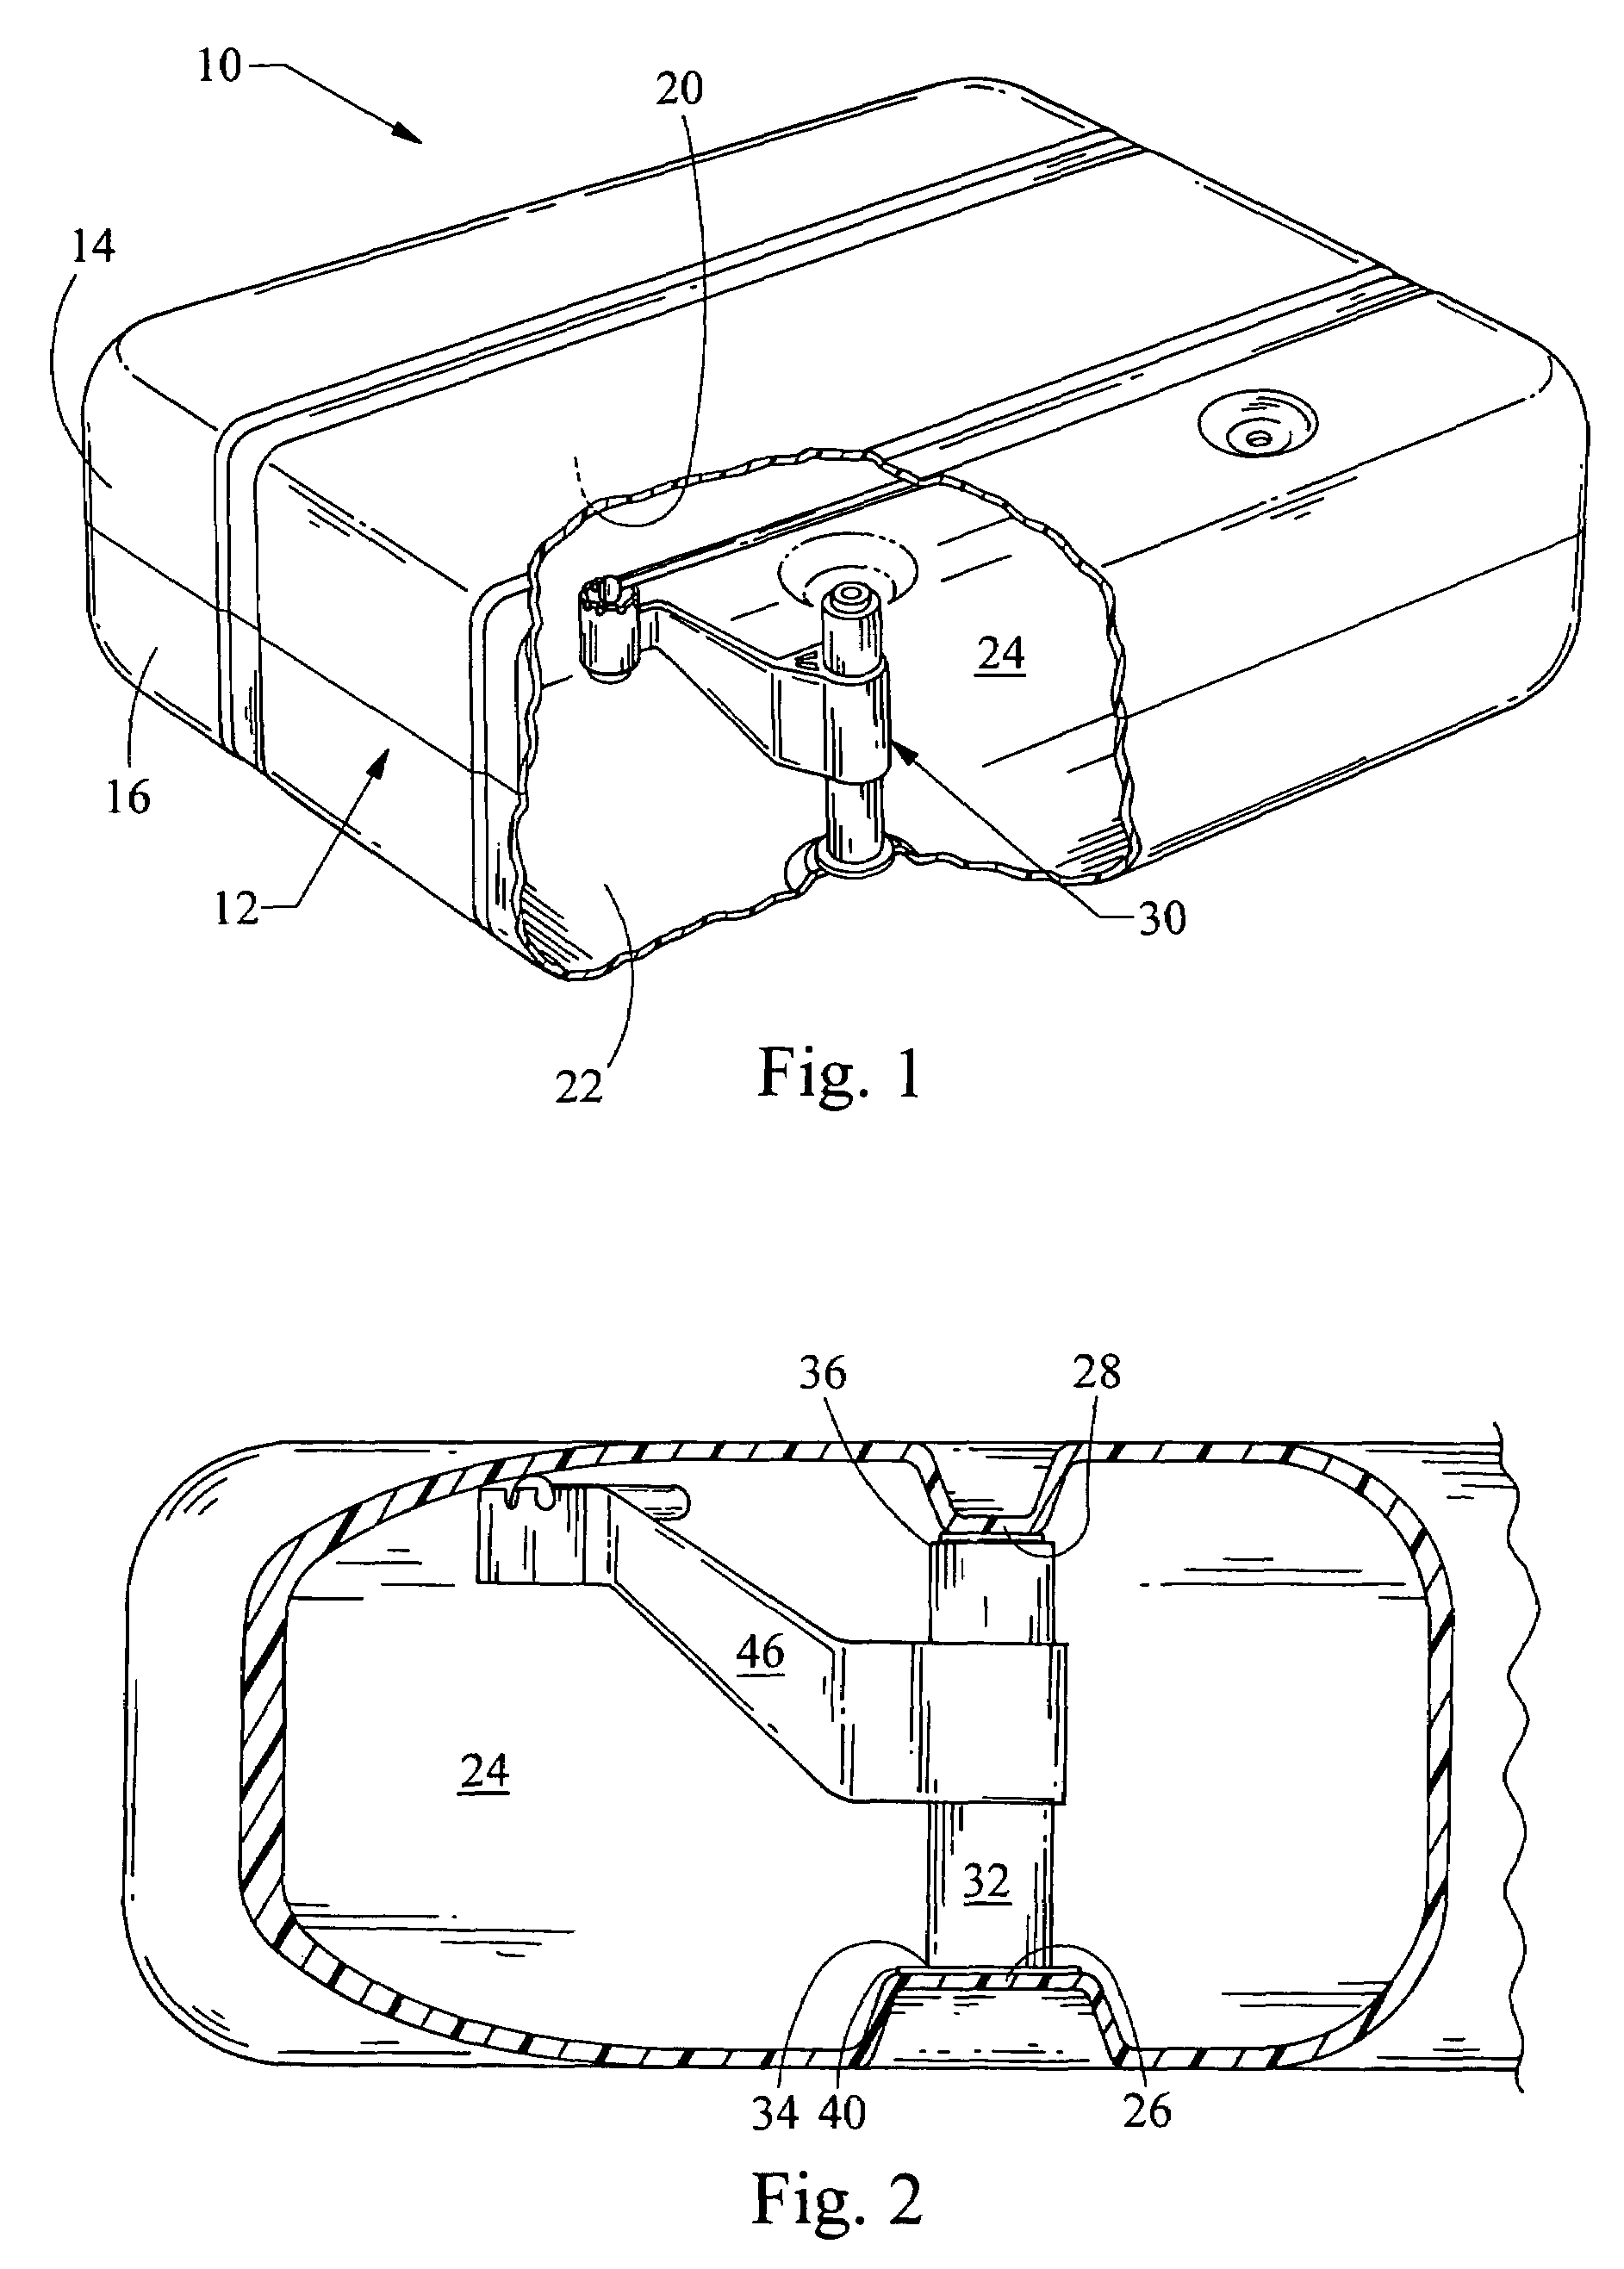 Fuel tank system having enhanced durability and reduced permeation